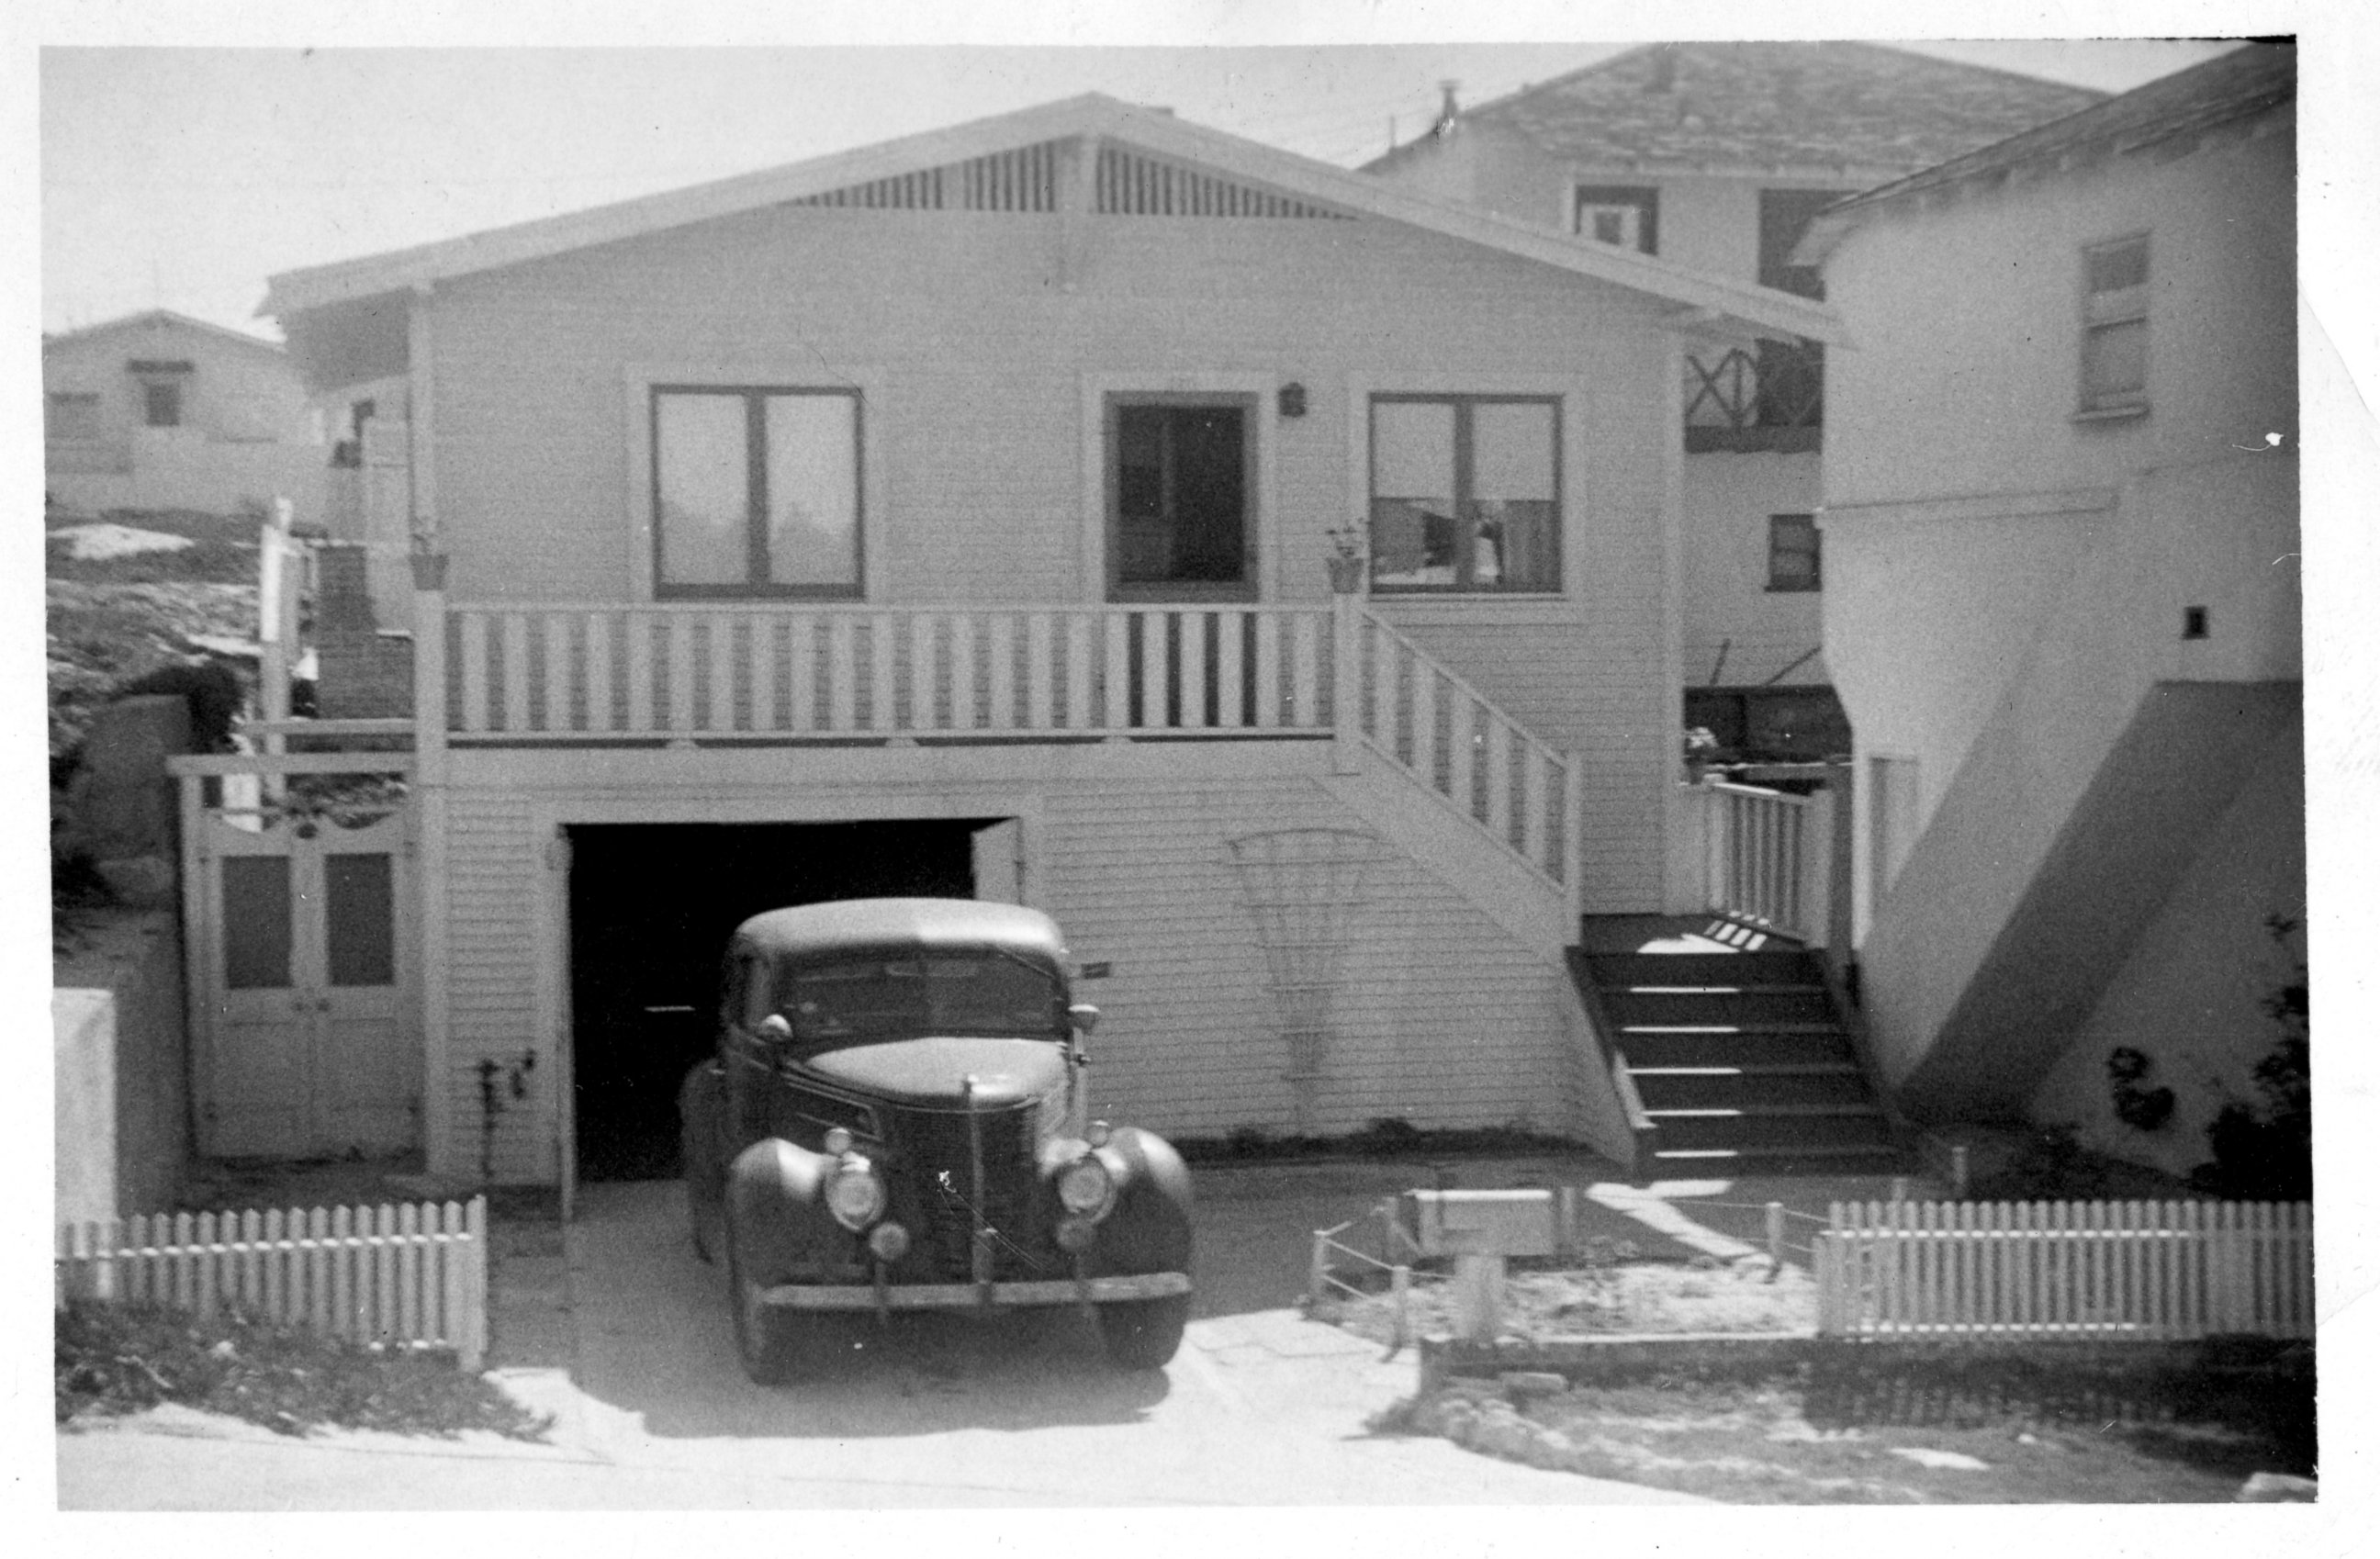 PHOTO: Sweeney's mother bought the Manhattan Beach home in 1945. Back then it was a "very sleepy town," according to Sweeney.